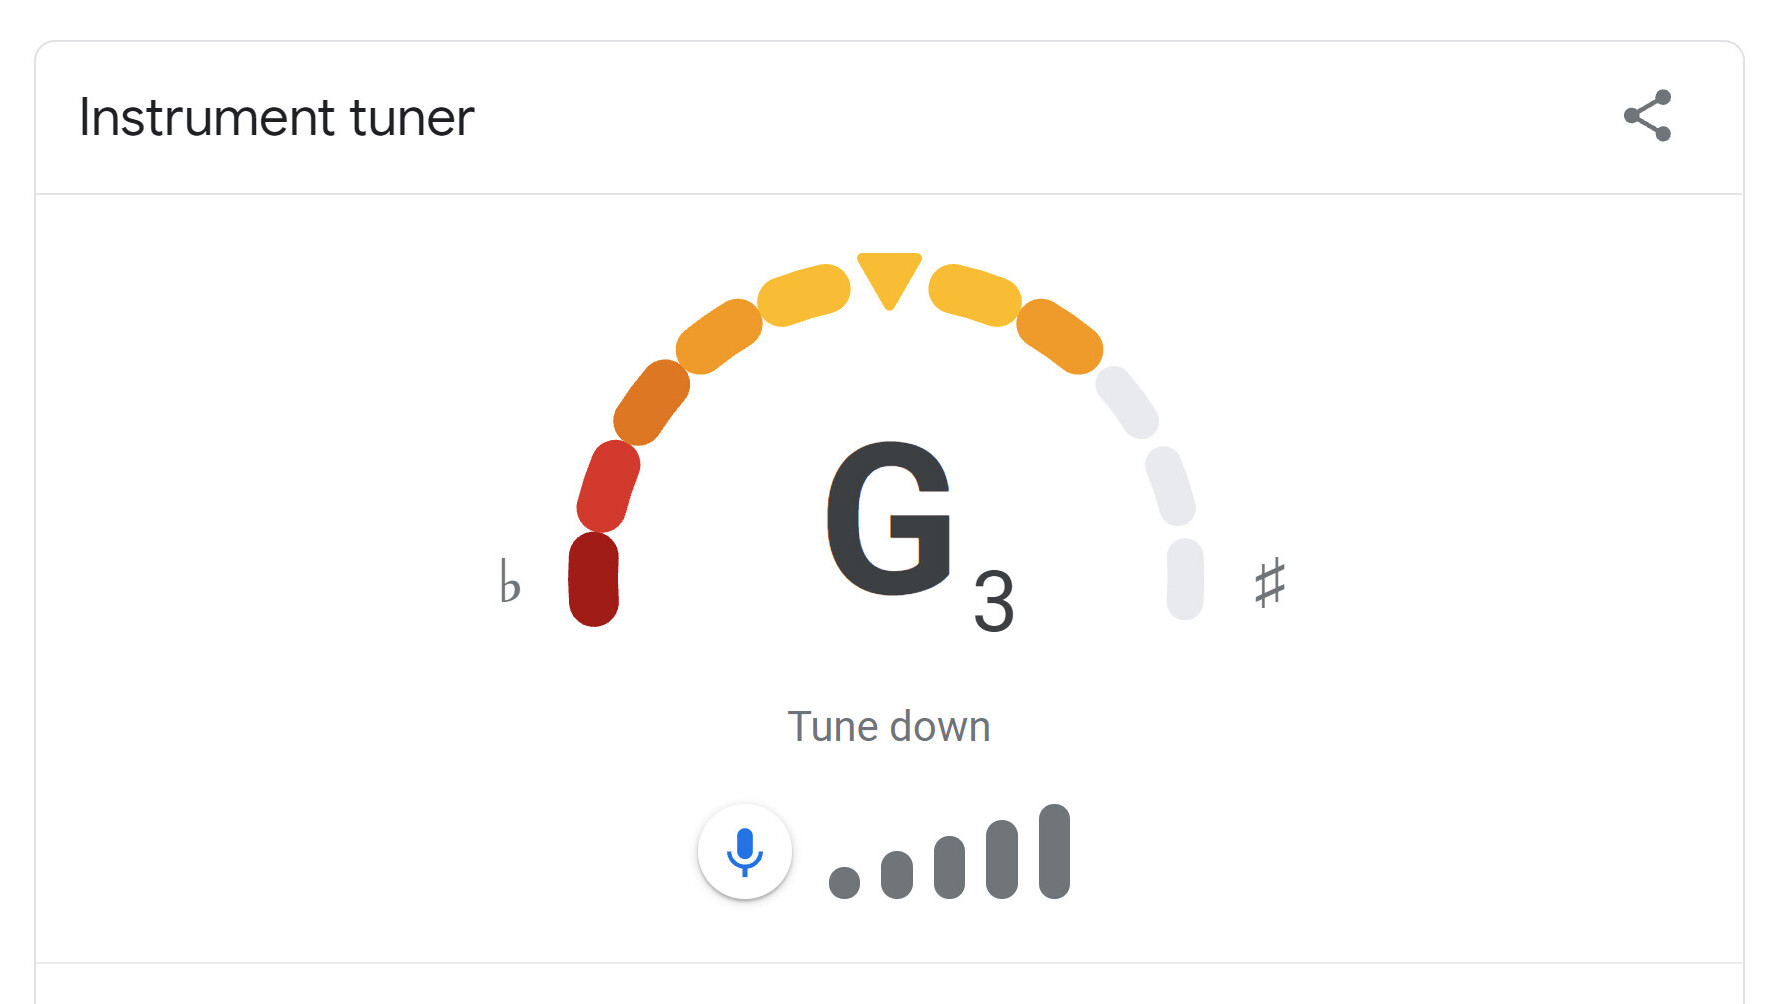 You can now tune your guitar right on Google Search